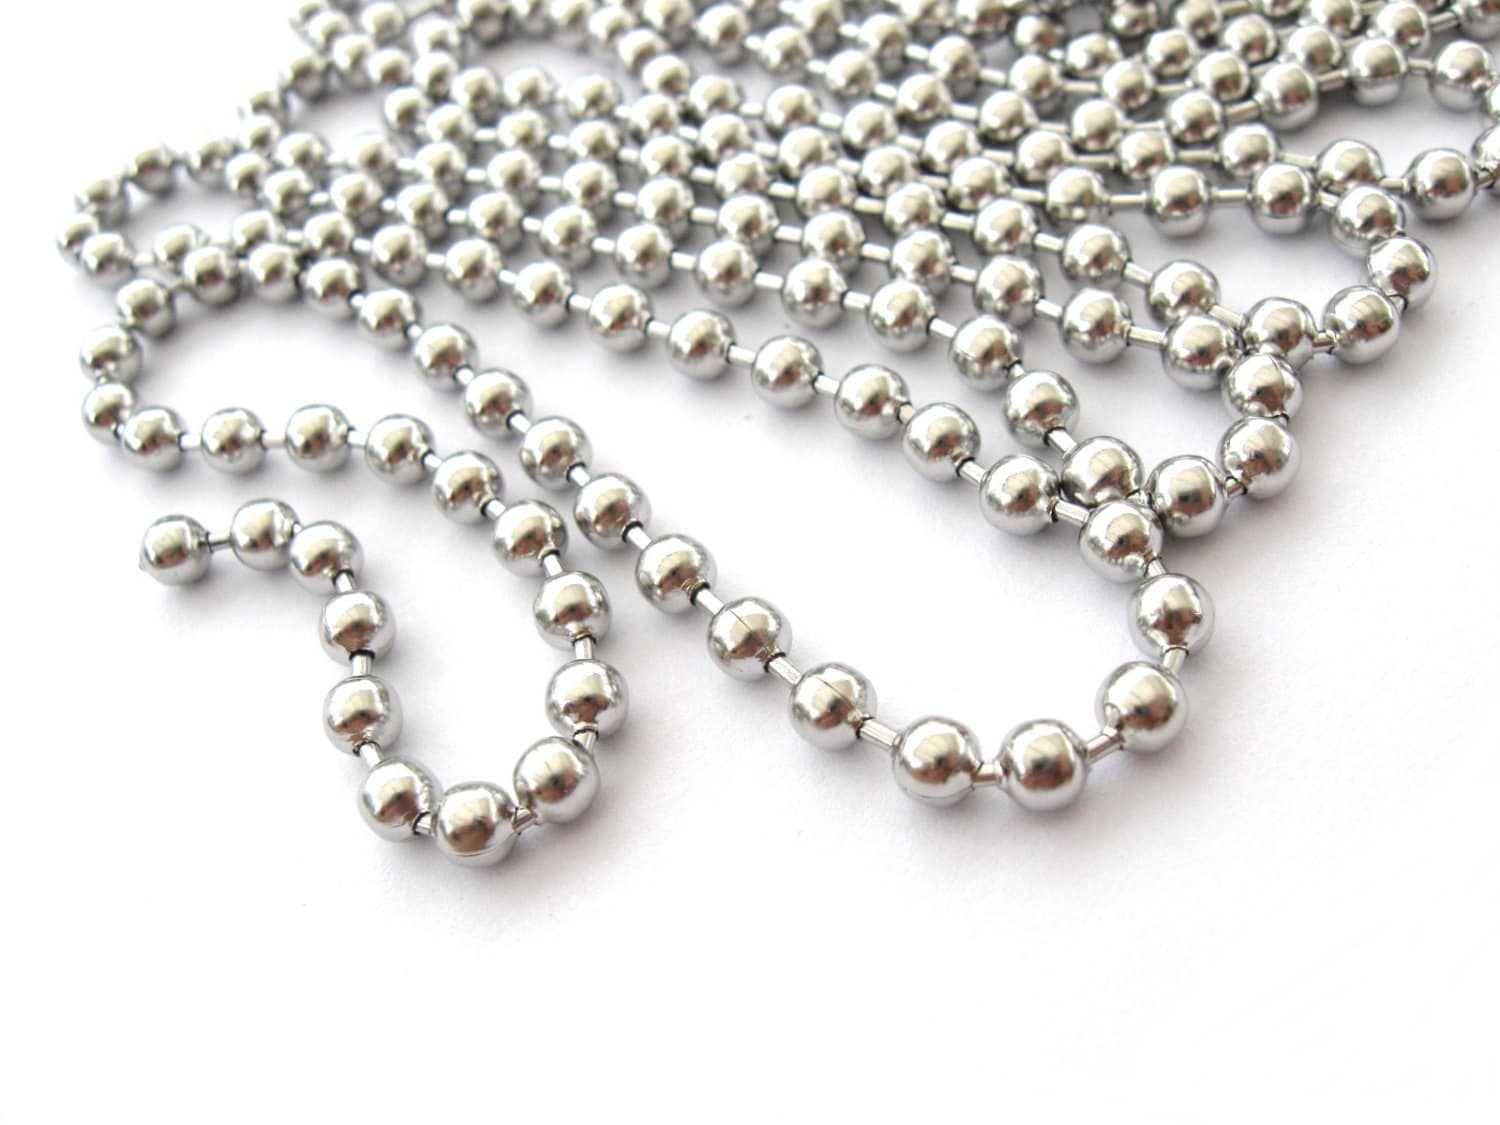 Big Stainless Steel Ball Chain 4mm 10 feet 10 Stainless Steel Ball Chain